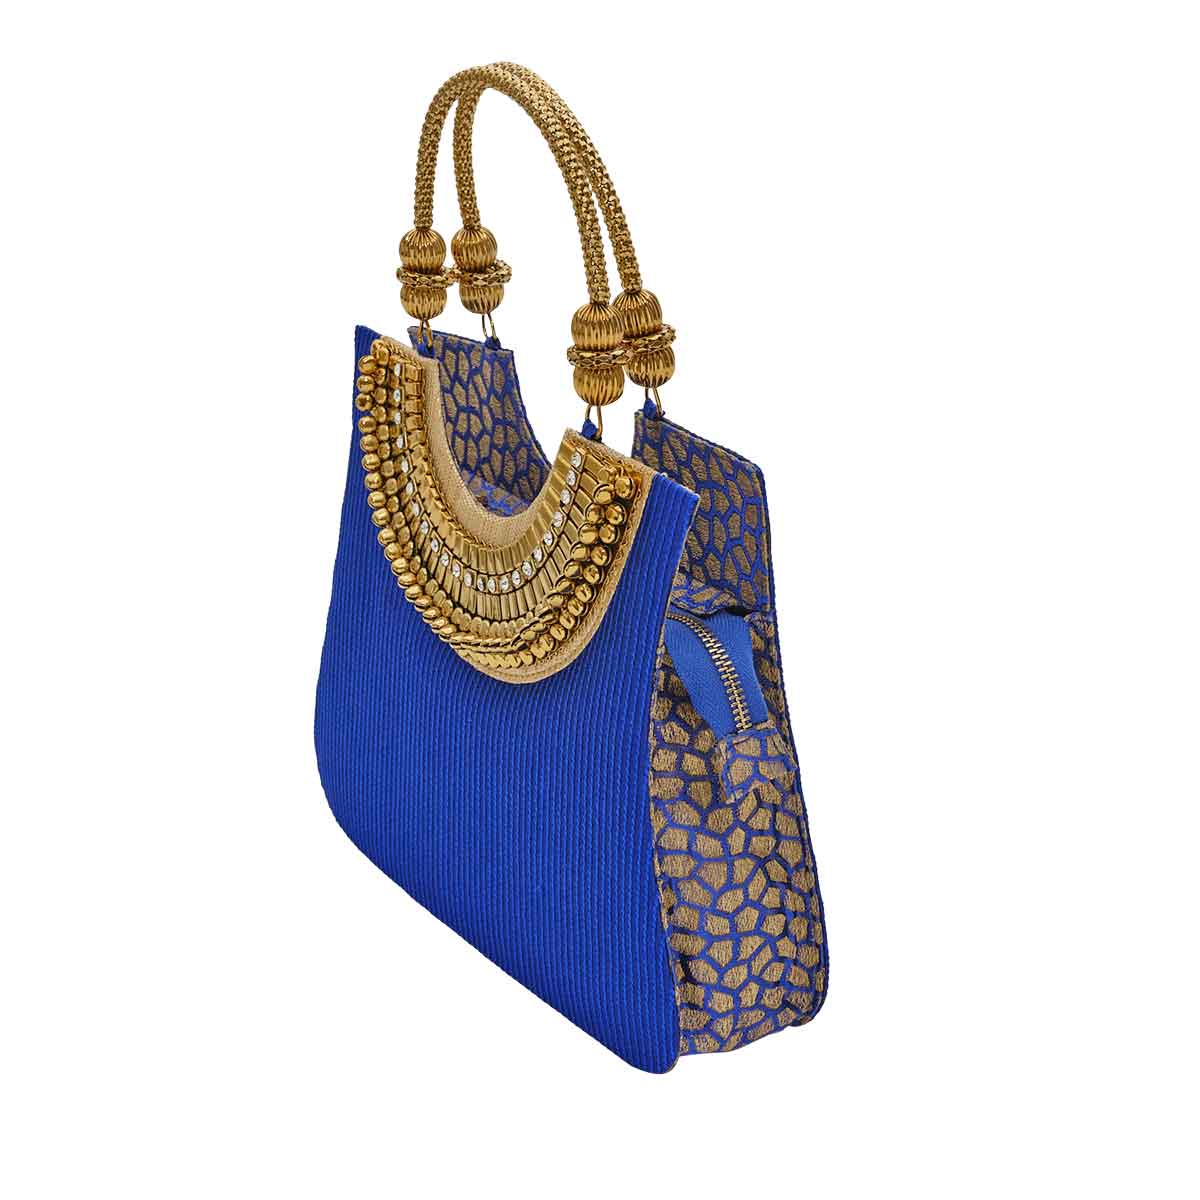 Suriya Mini tote blue and gold with ornate handles. As seen on ramp at NYFW 2021 and editorials. Side  view, animal print flap